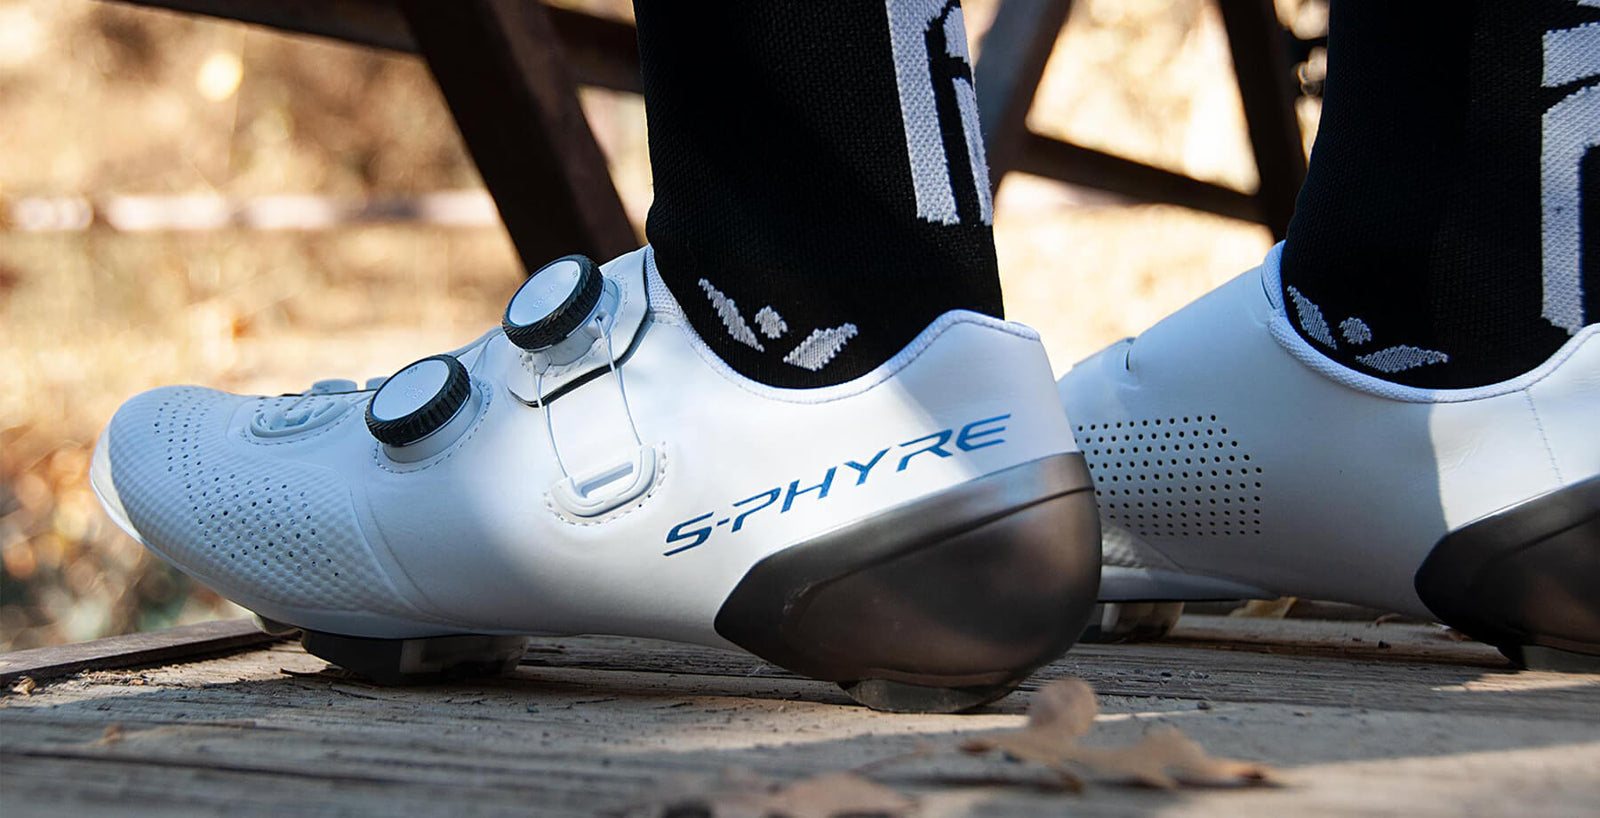 Introducing the New Shimano S-Phyre RC902 Road Shoes